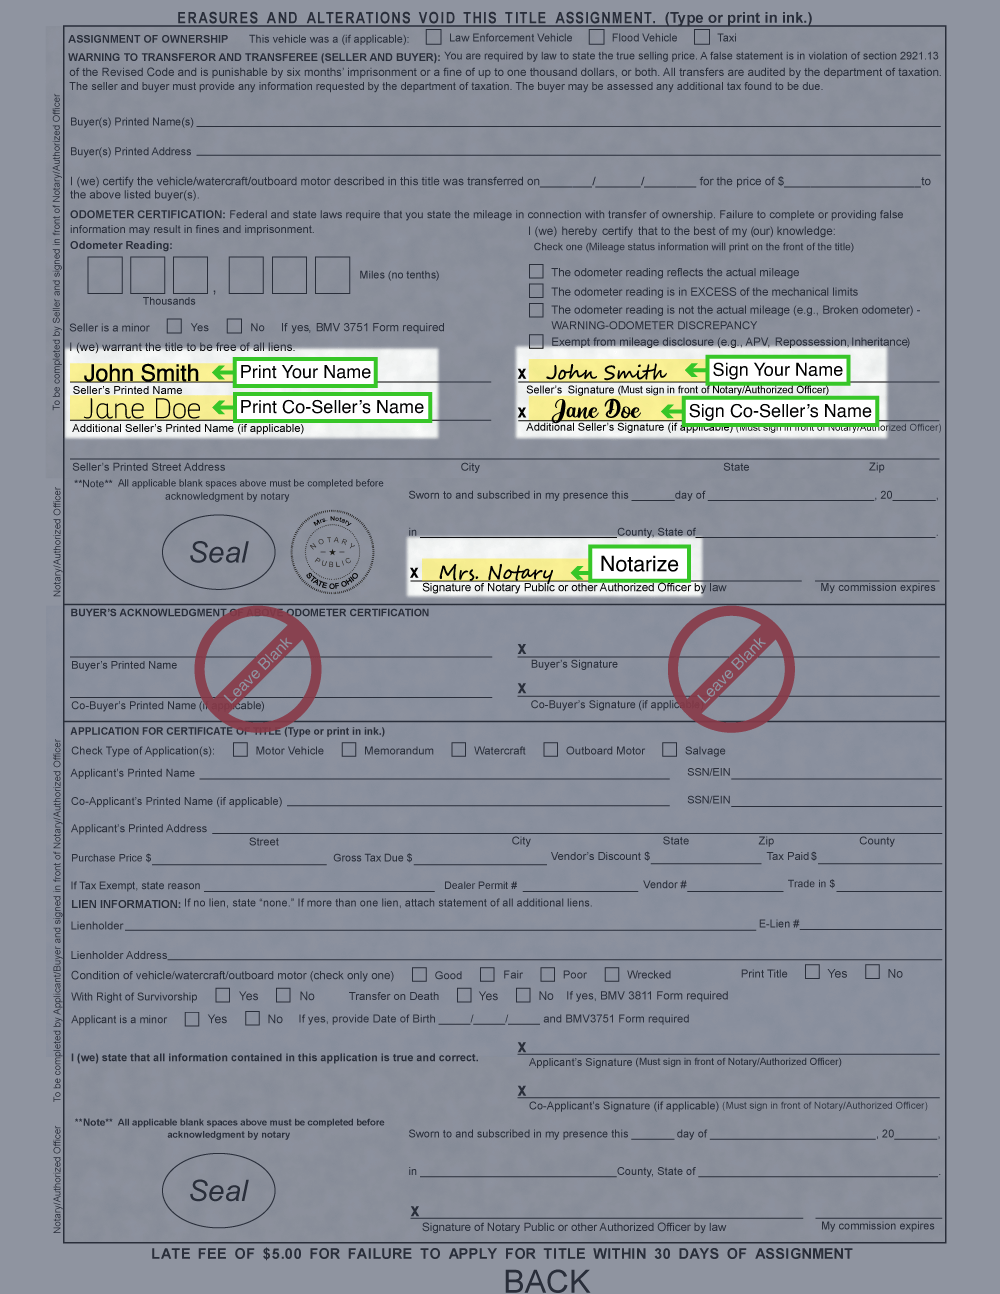 How to Sign Your Title in Ohio (image)